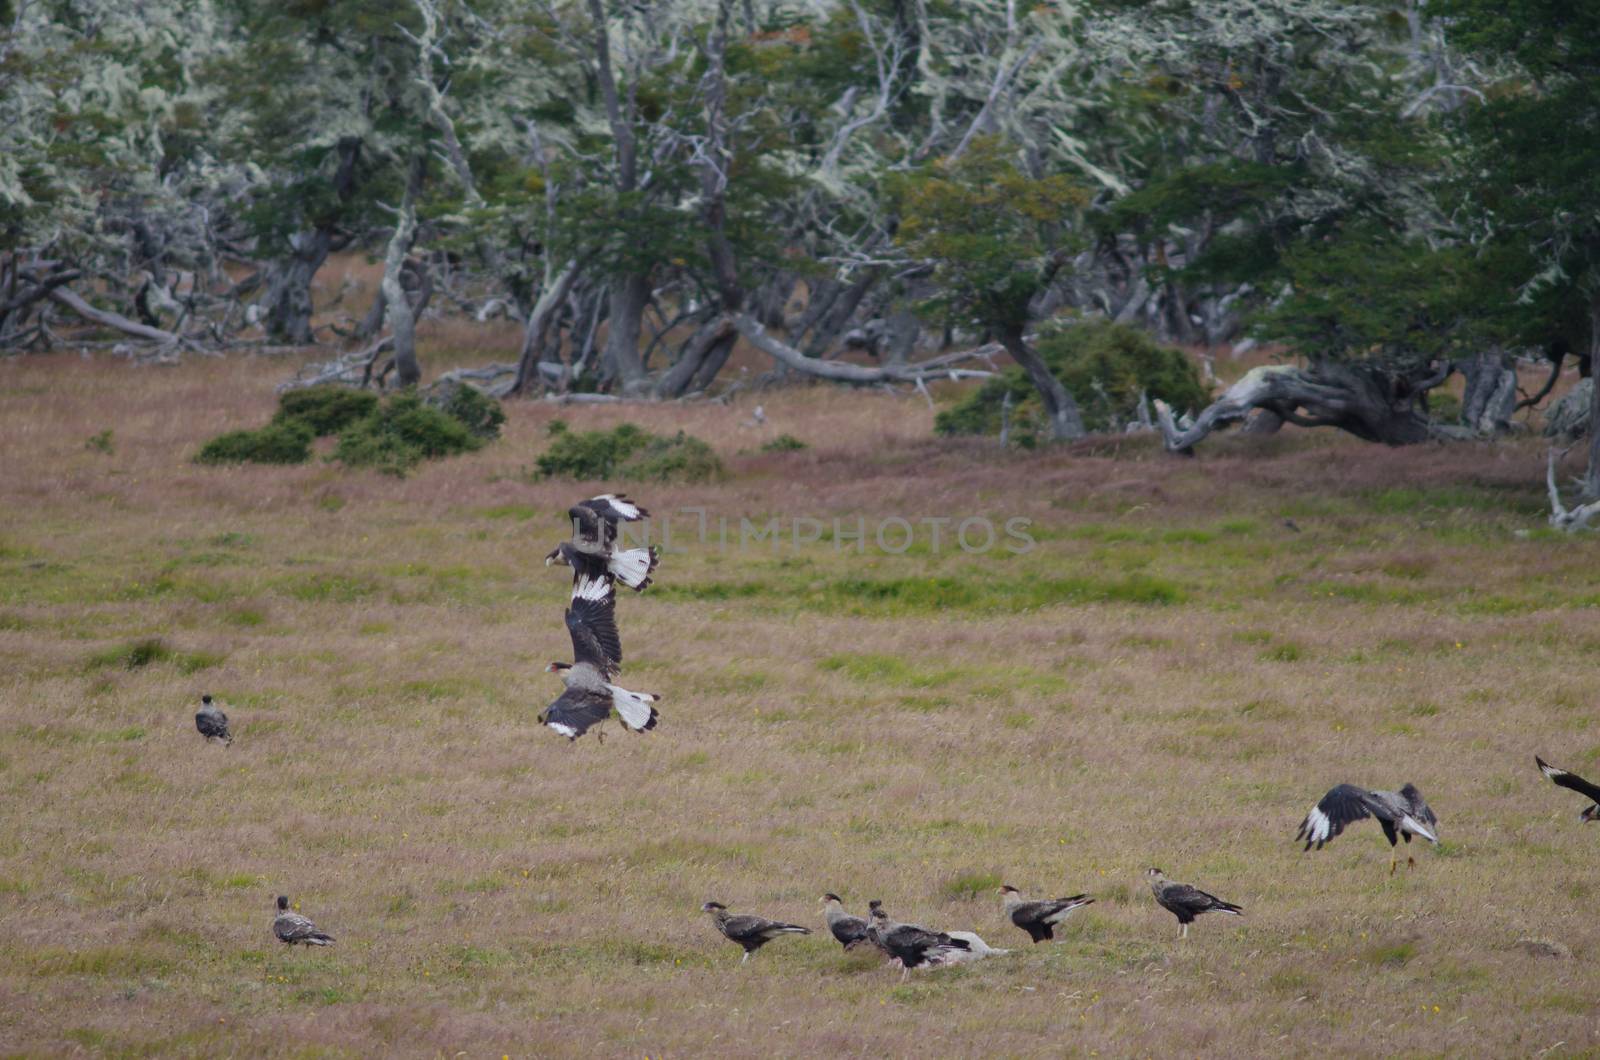 Southern crested caracaras Caracara plancus eating on the carcasses of a sheep. Chilean Patagonia. Magallanes and Chilean Antarctic Region. Chile.